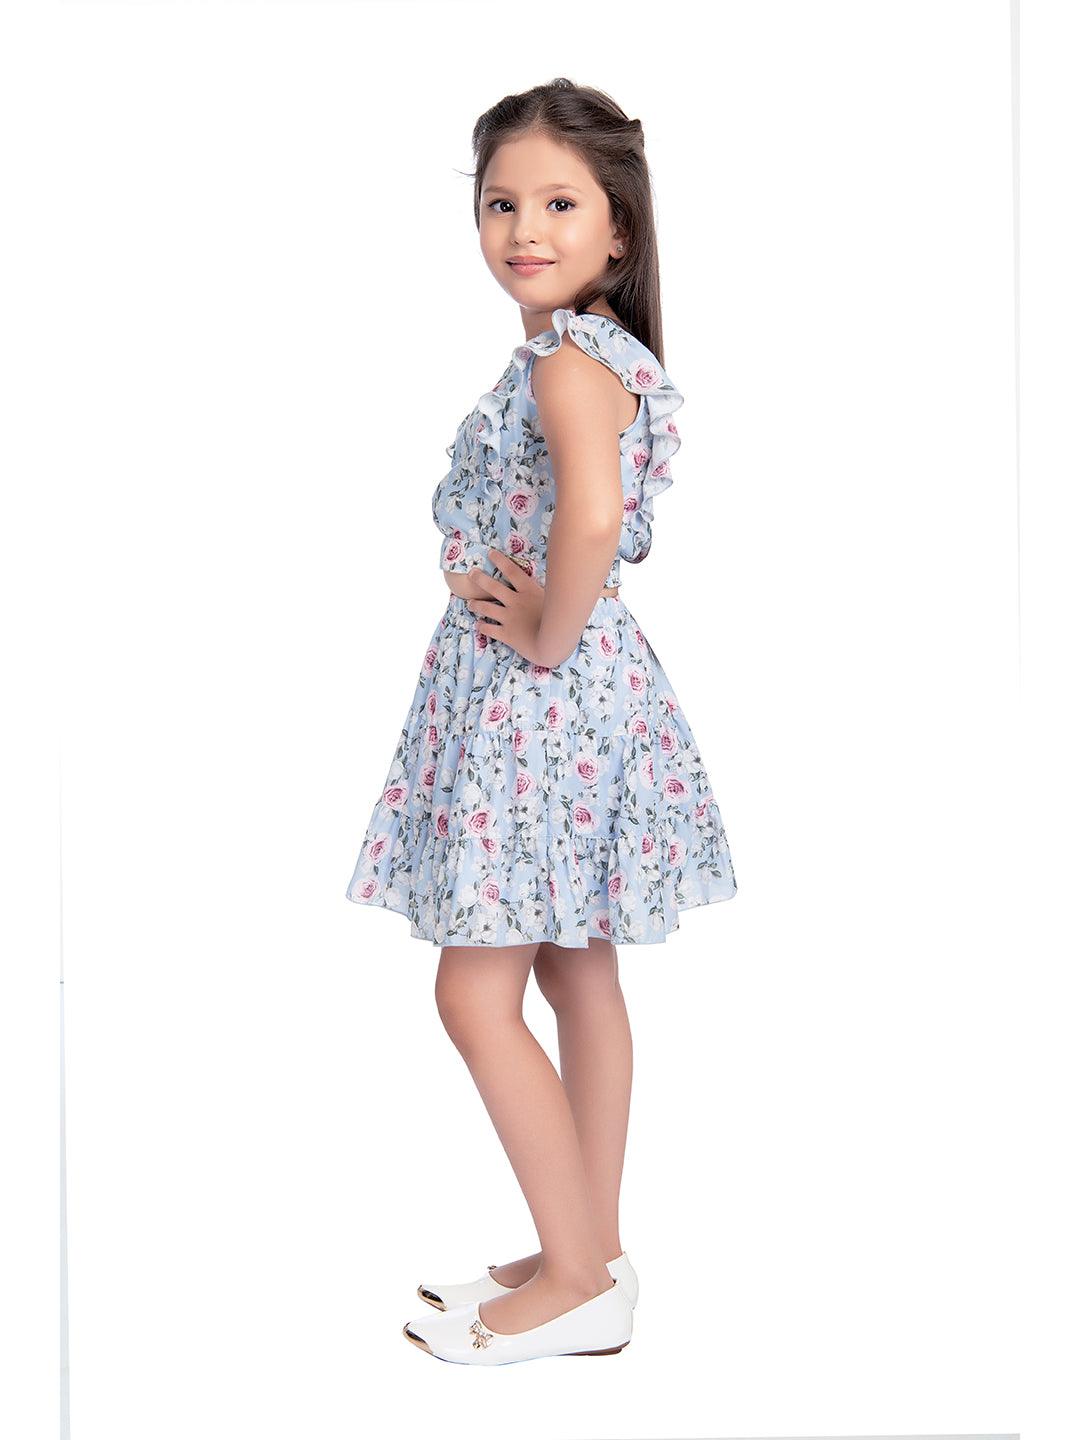 Sky Blue Colored Skirt Top set - 2095 Sky Blue - TINY BABY INDIA shop.tinybaby.in